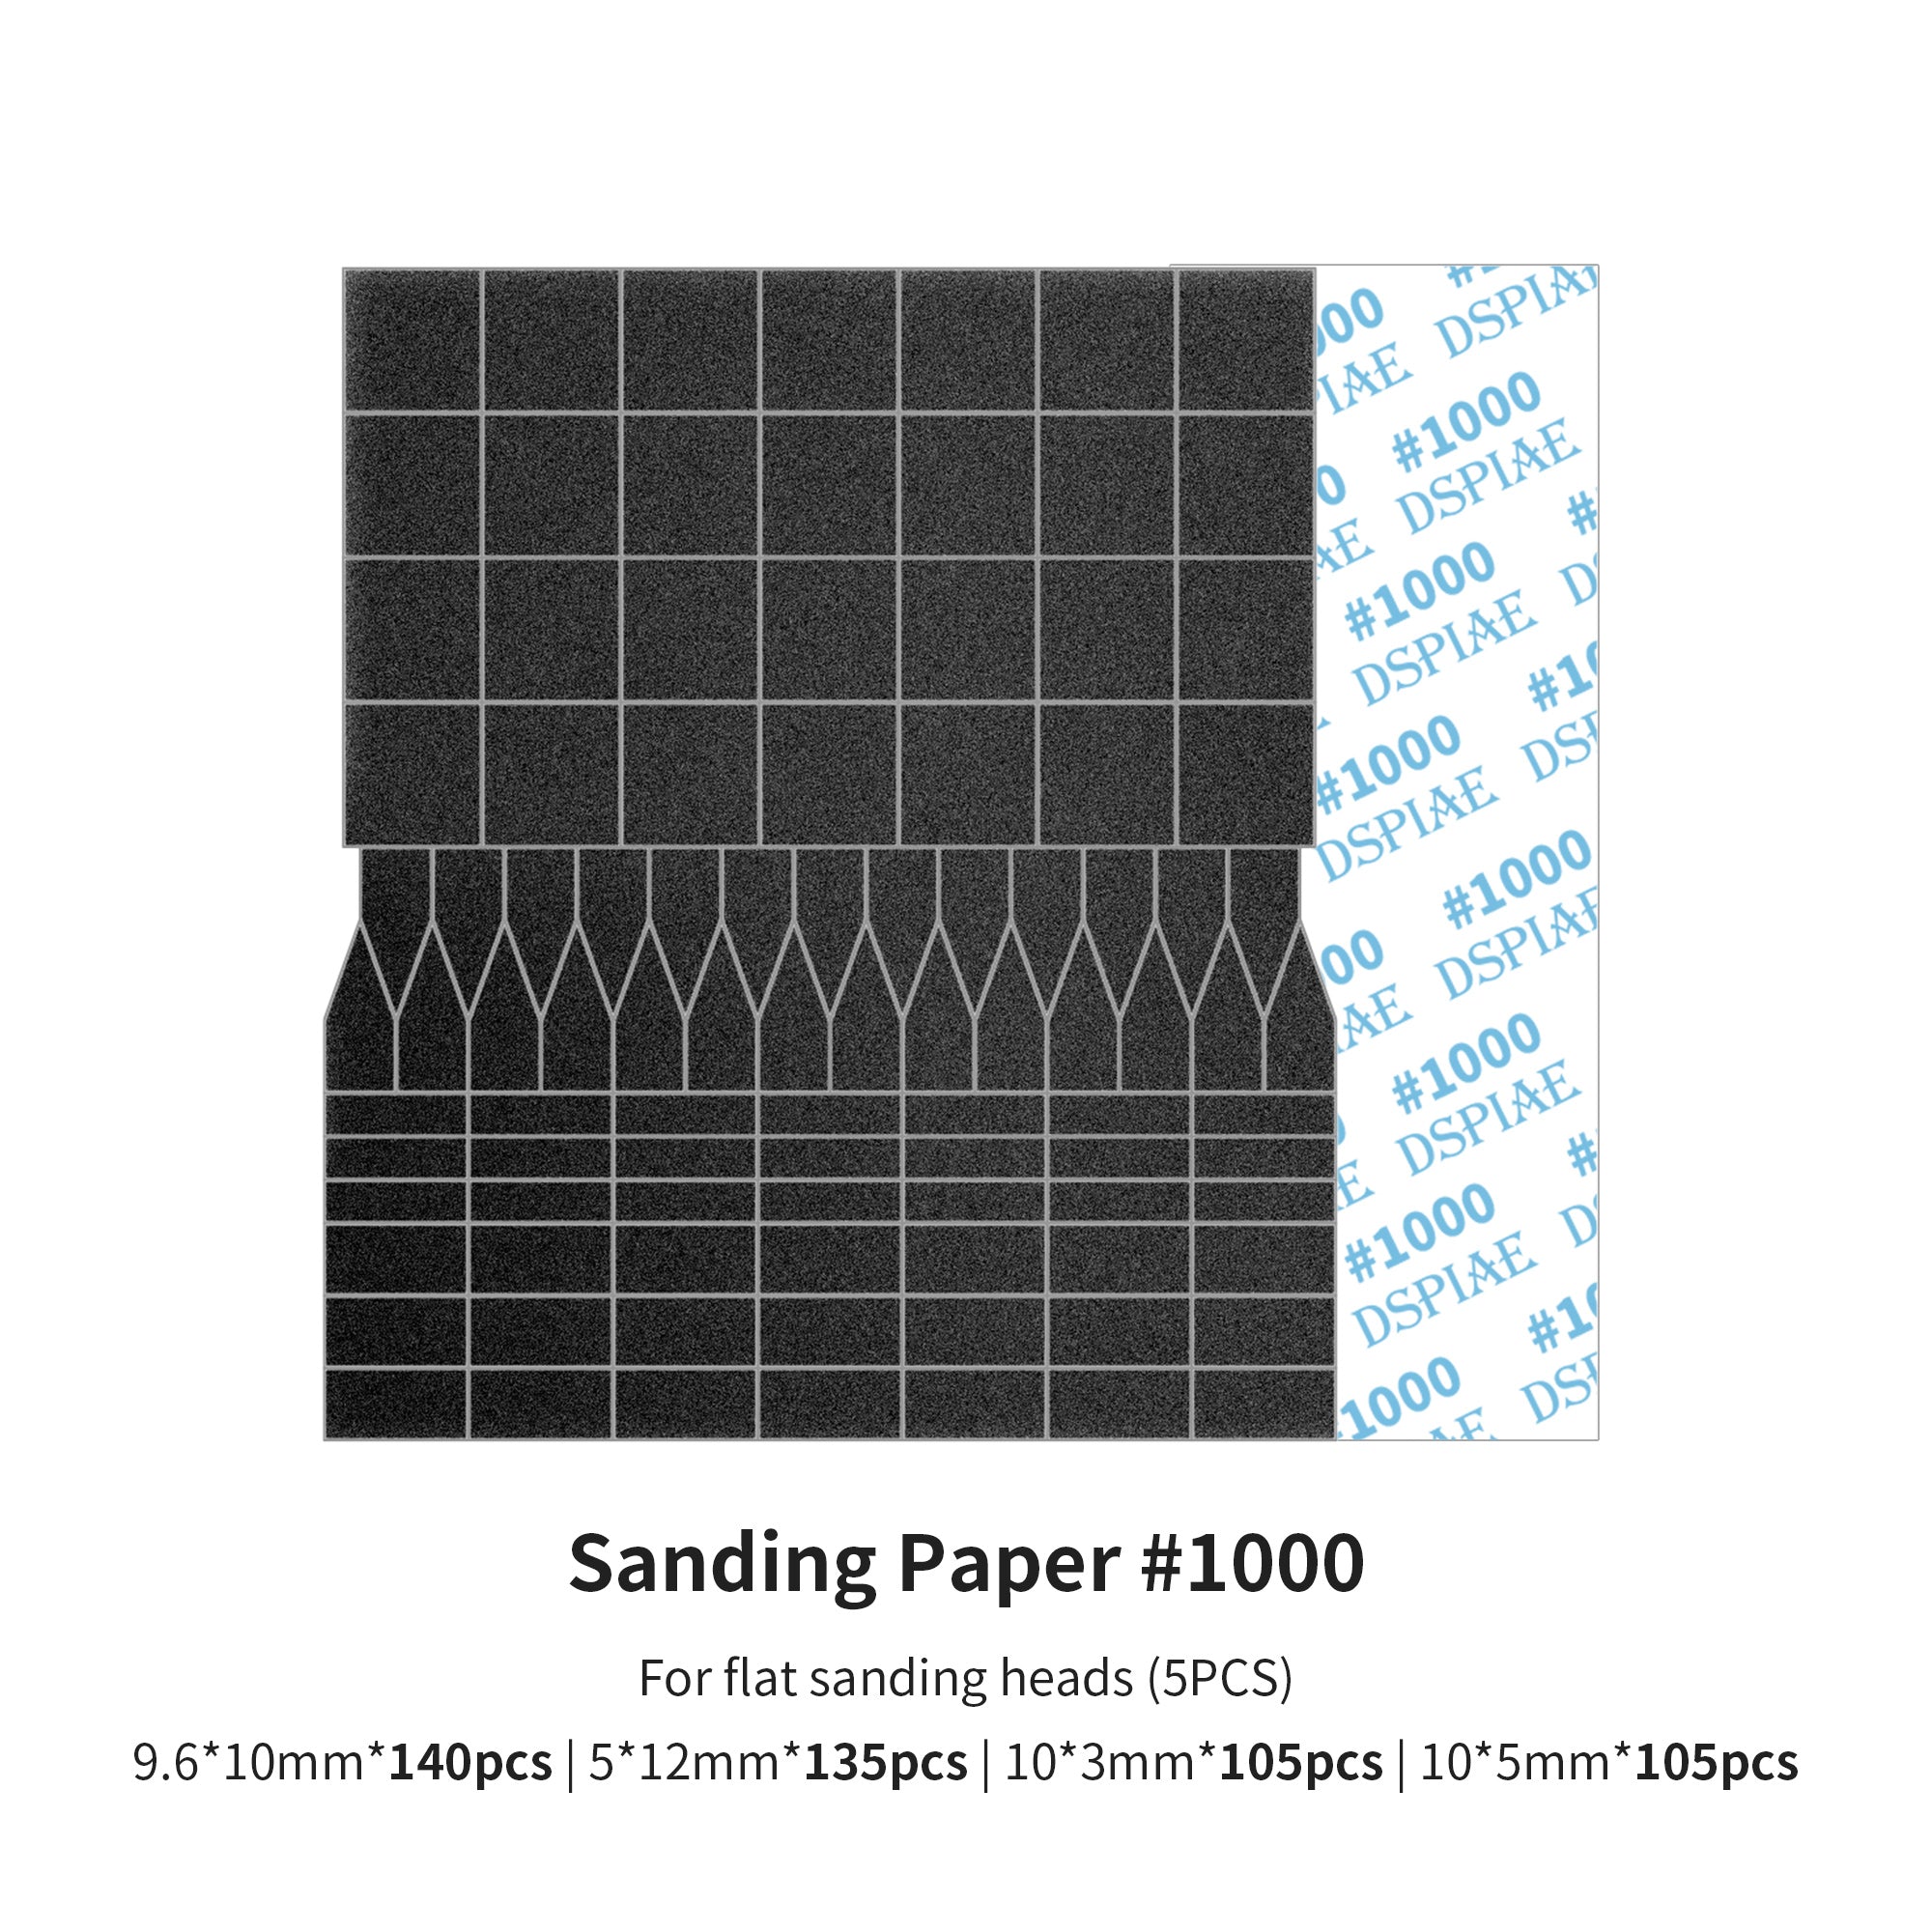 SP Sanding paper for DSPIAE ES-A RECIPROCATING SANDER (Flat head)